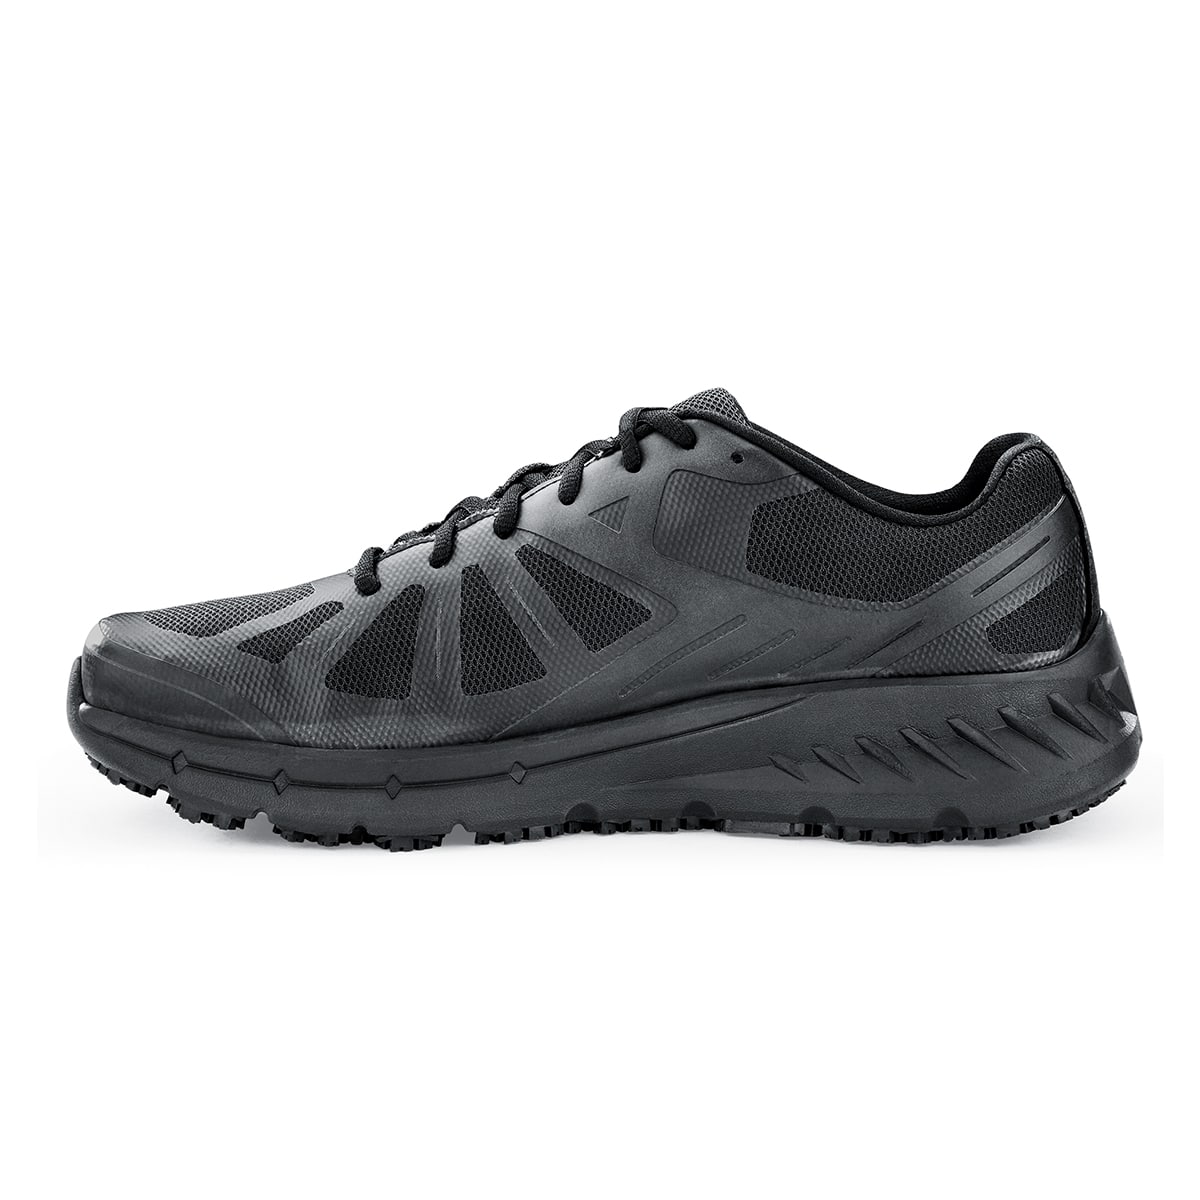 The Endurance II from Shoes For Crews is a slip-resistant shoe that features a Spill Guard to help keep out liquids, TripGuard and Flex Tread, seen from the left.